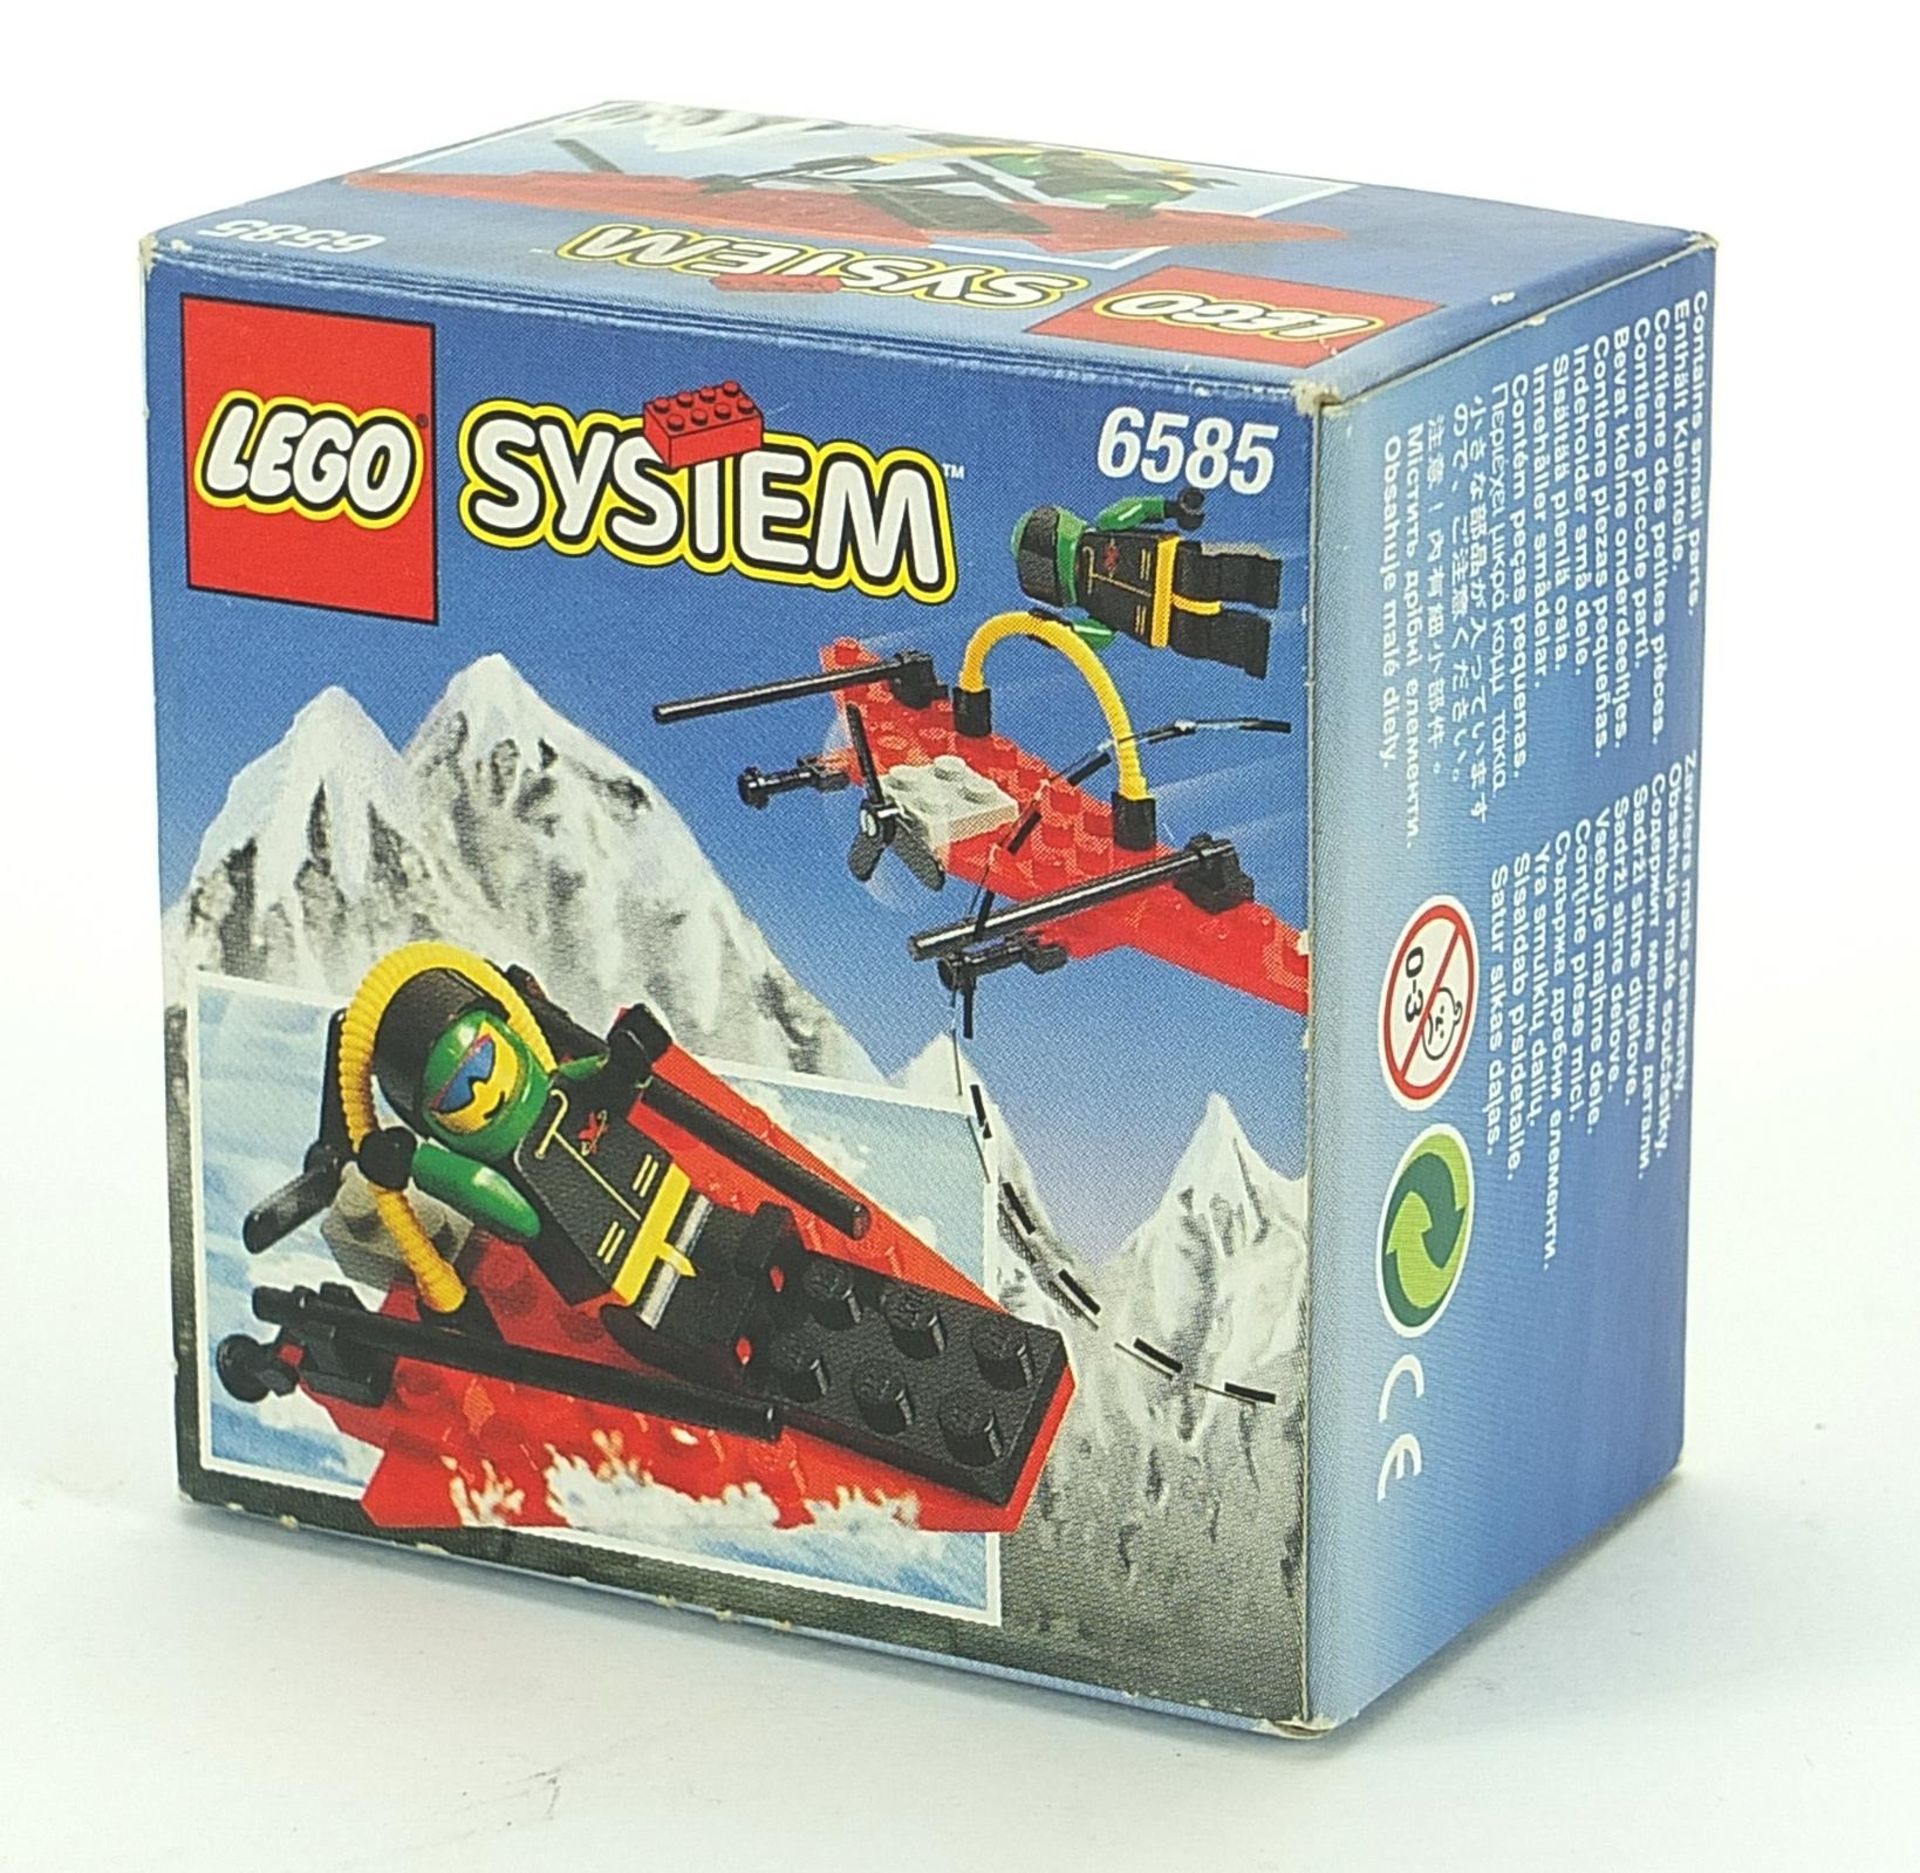 Vintage Lego System hang glider with box, 6585 - Image 2 of 2